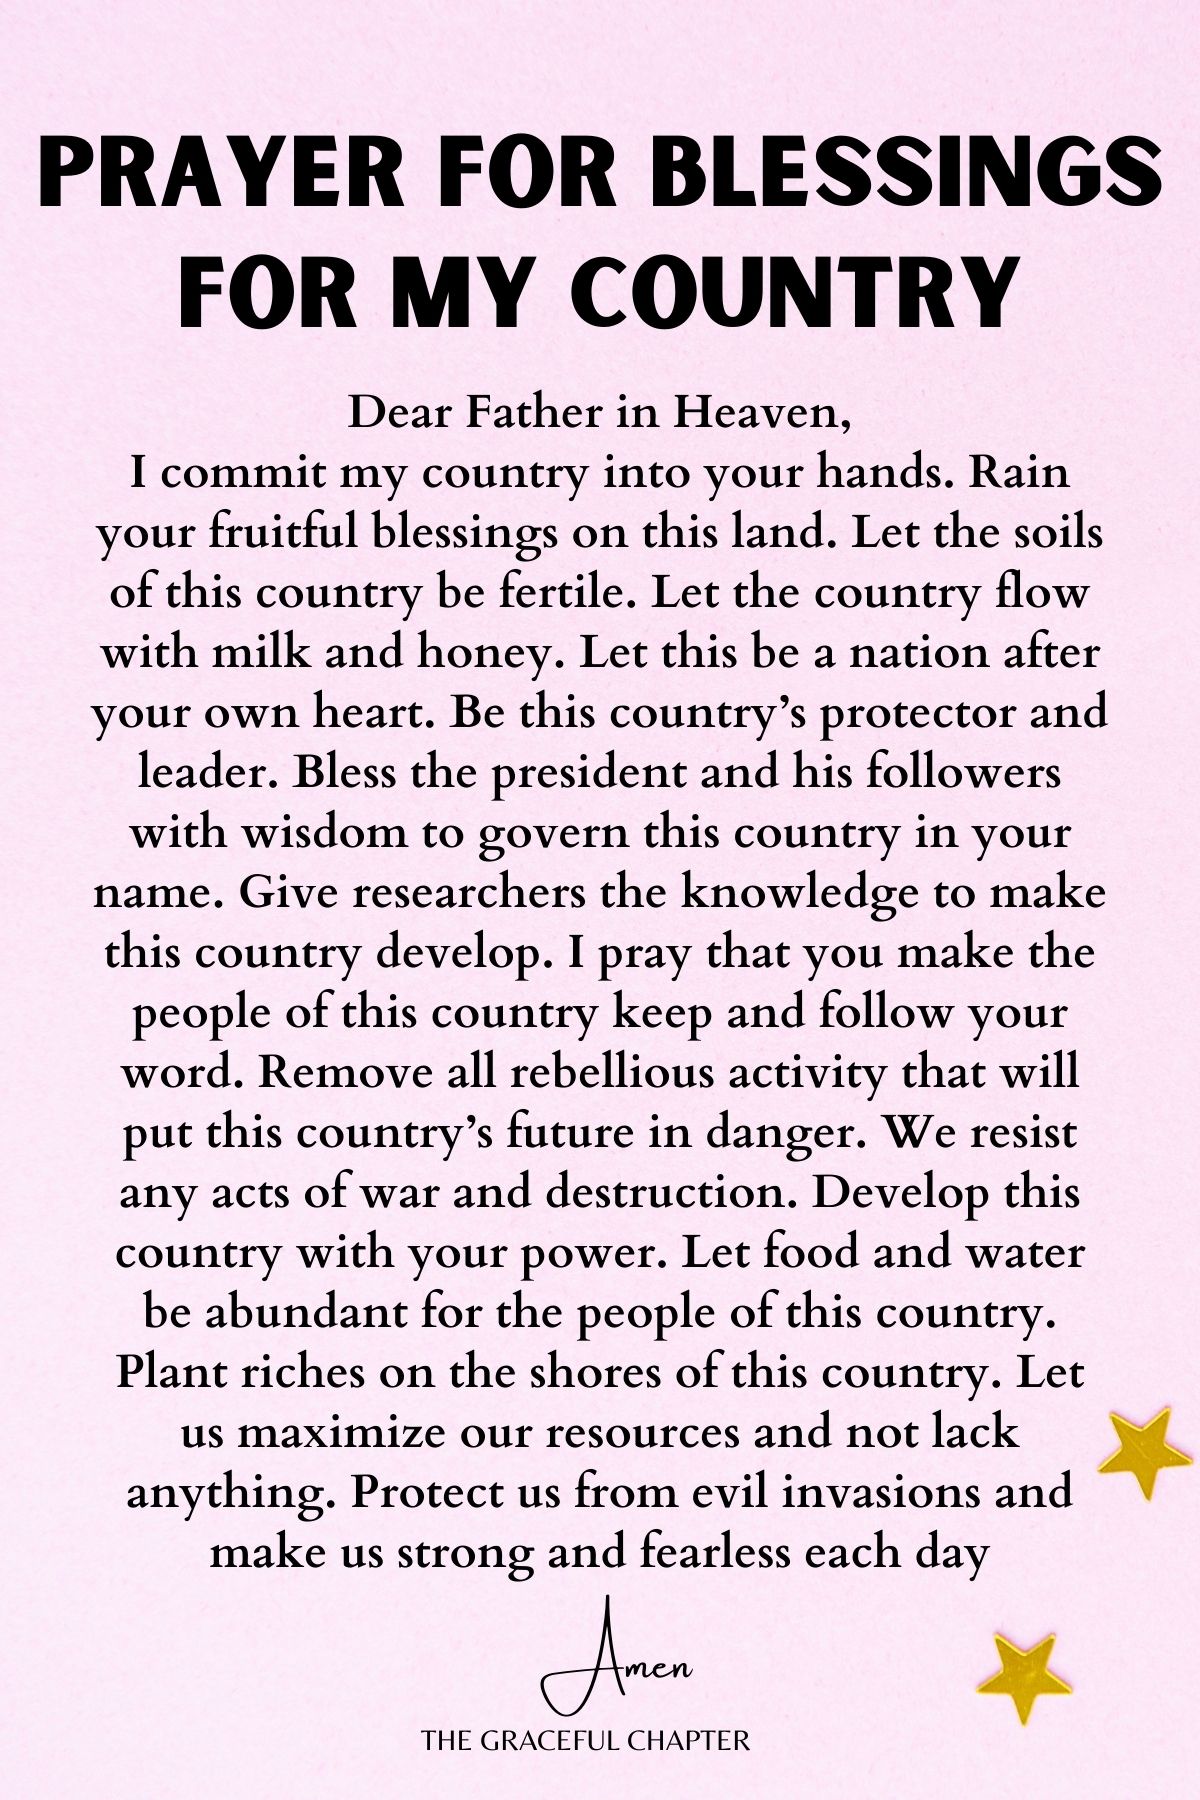 Prayer for blessings for your country